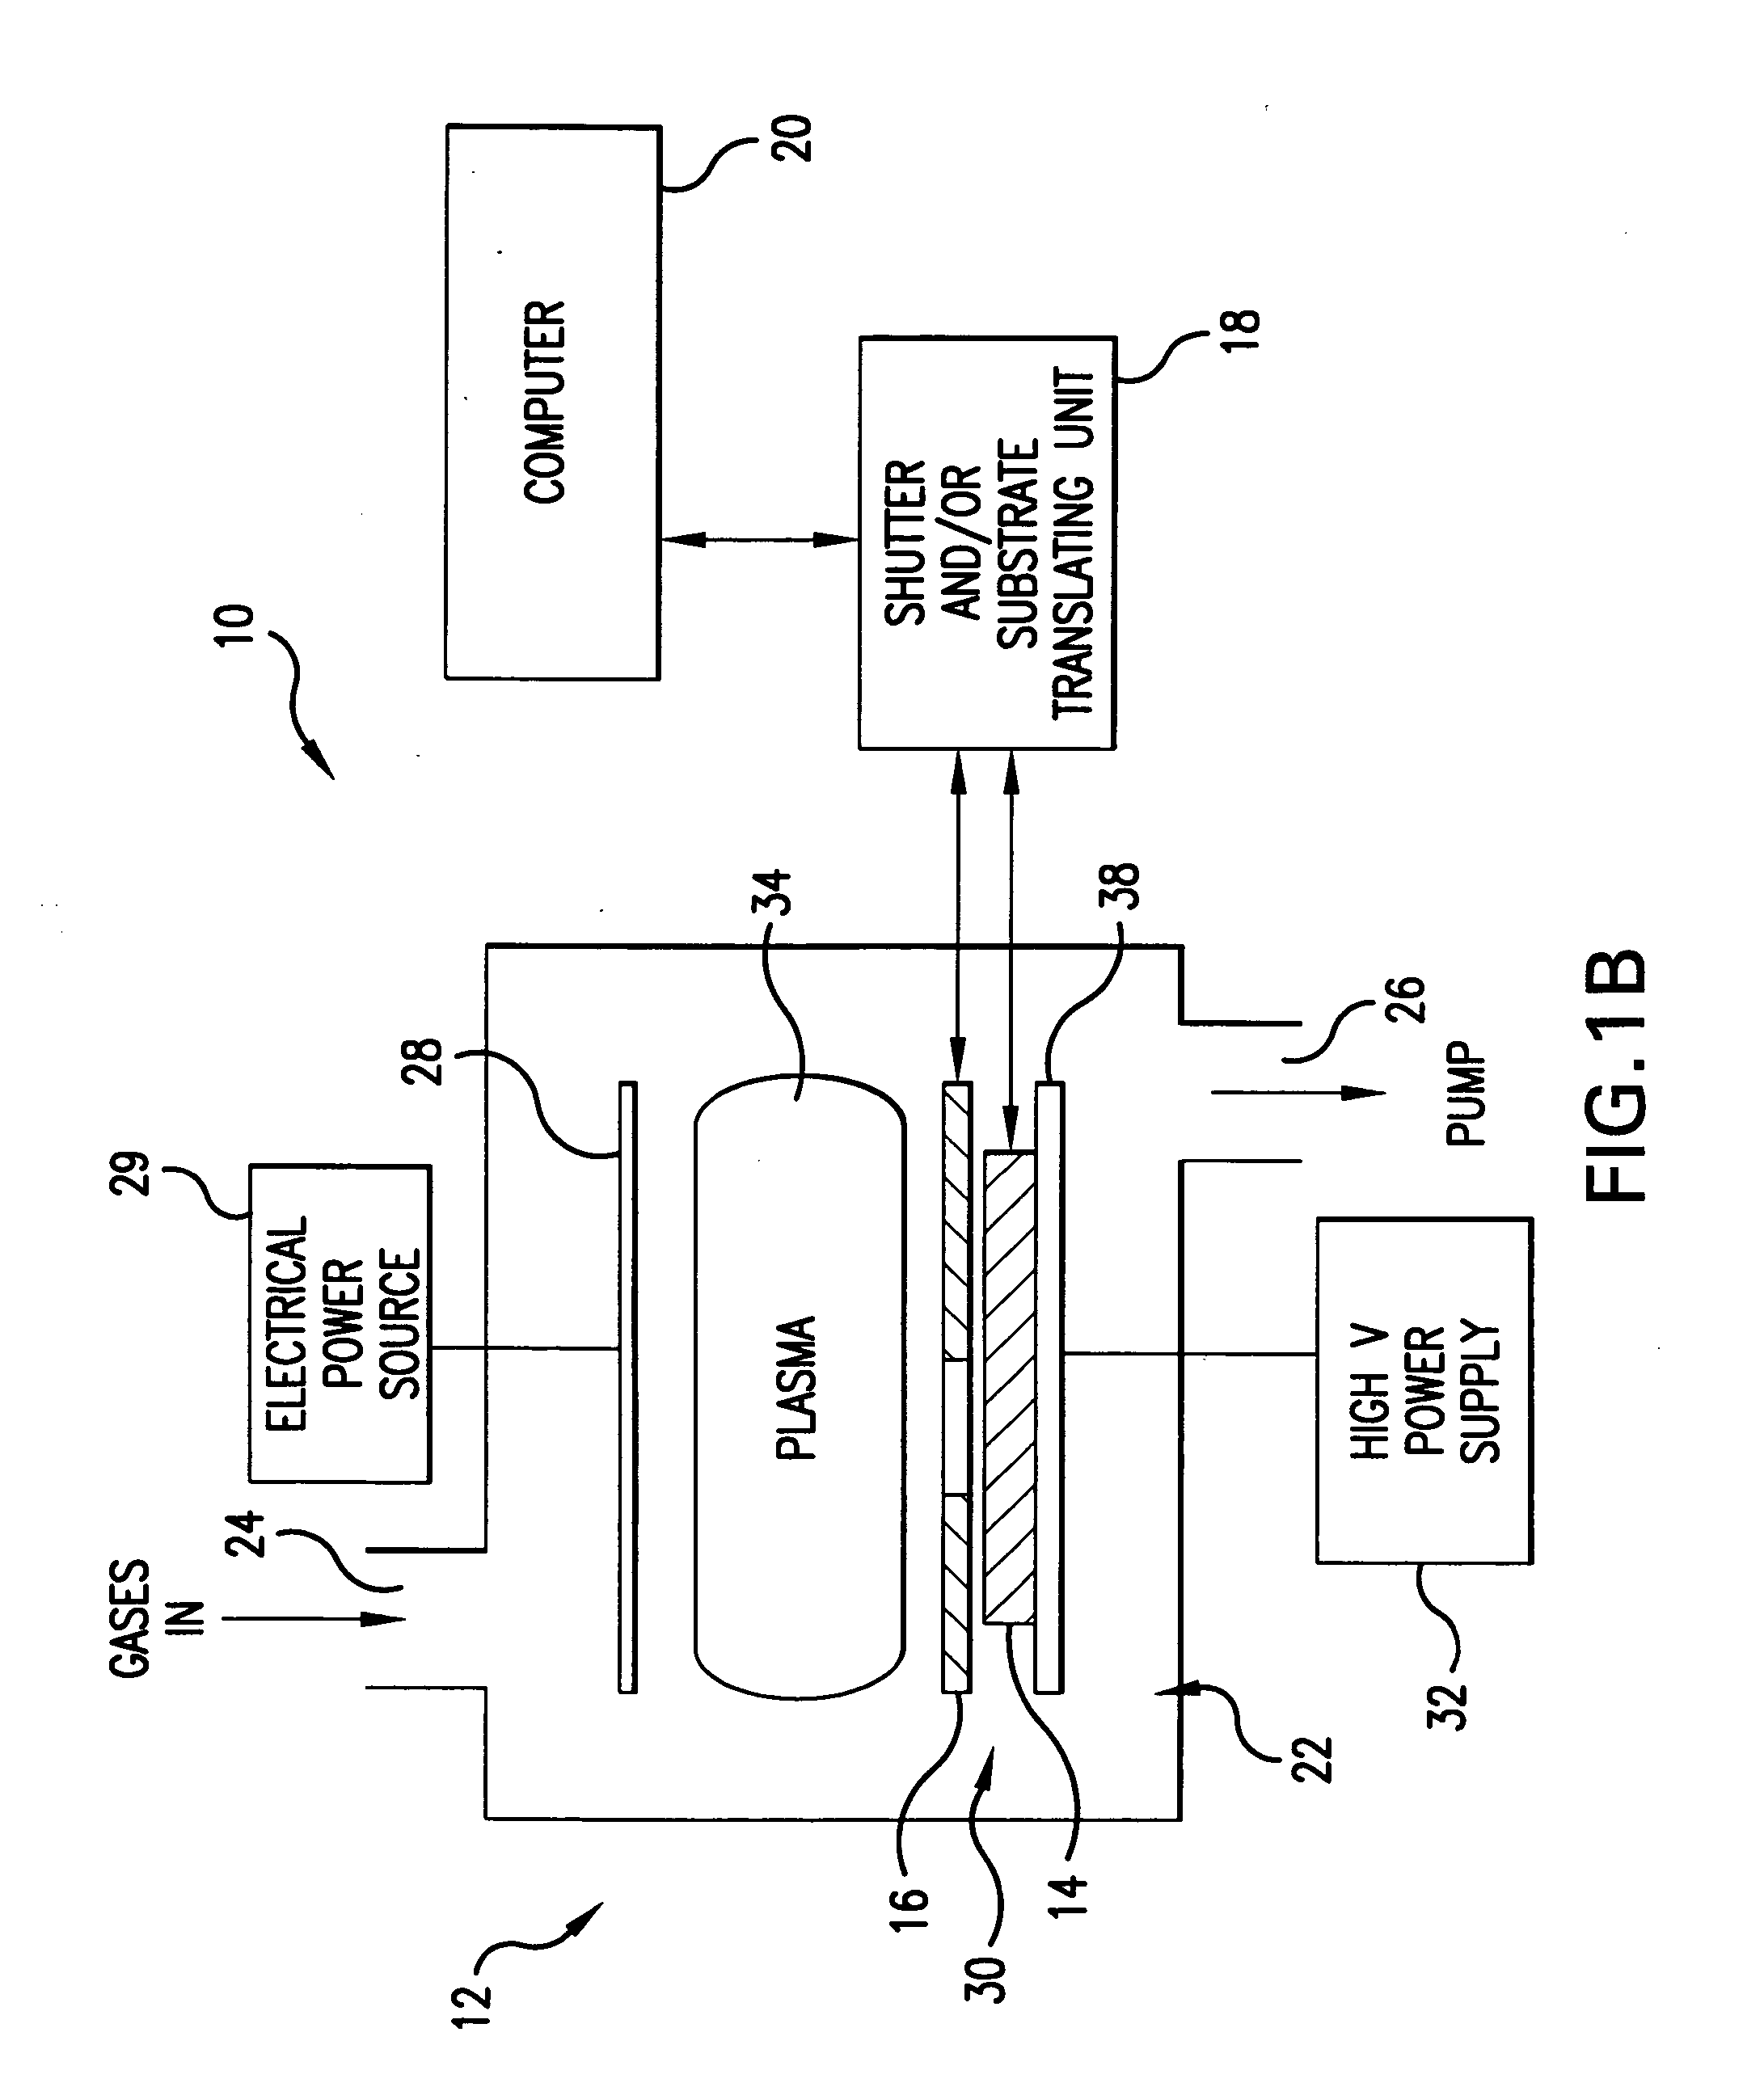 Method and system for nanoscale plasma processing of objects